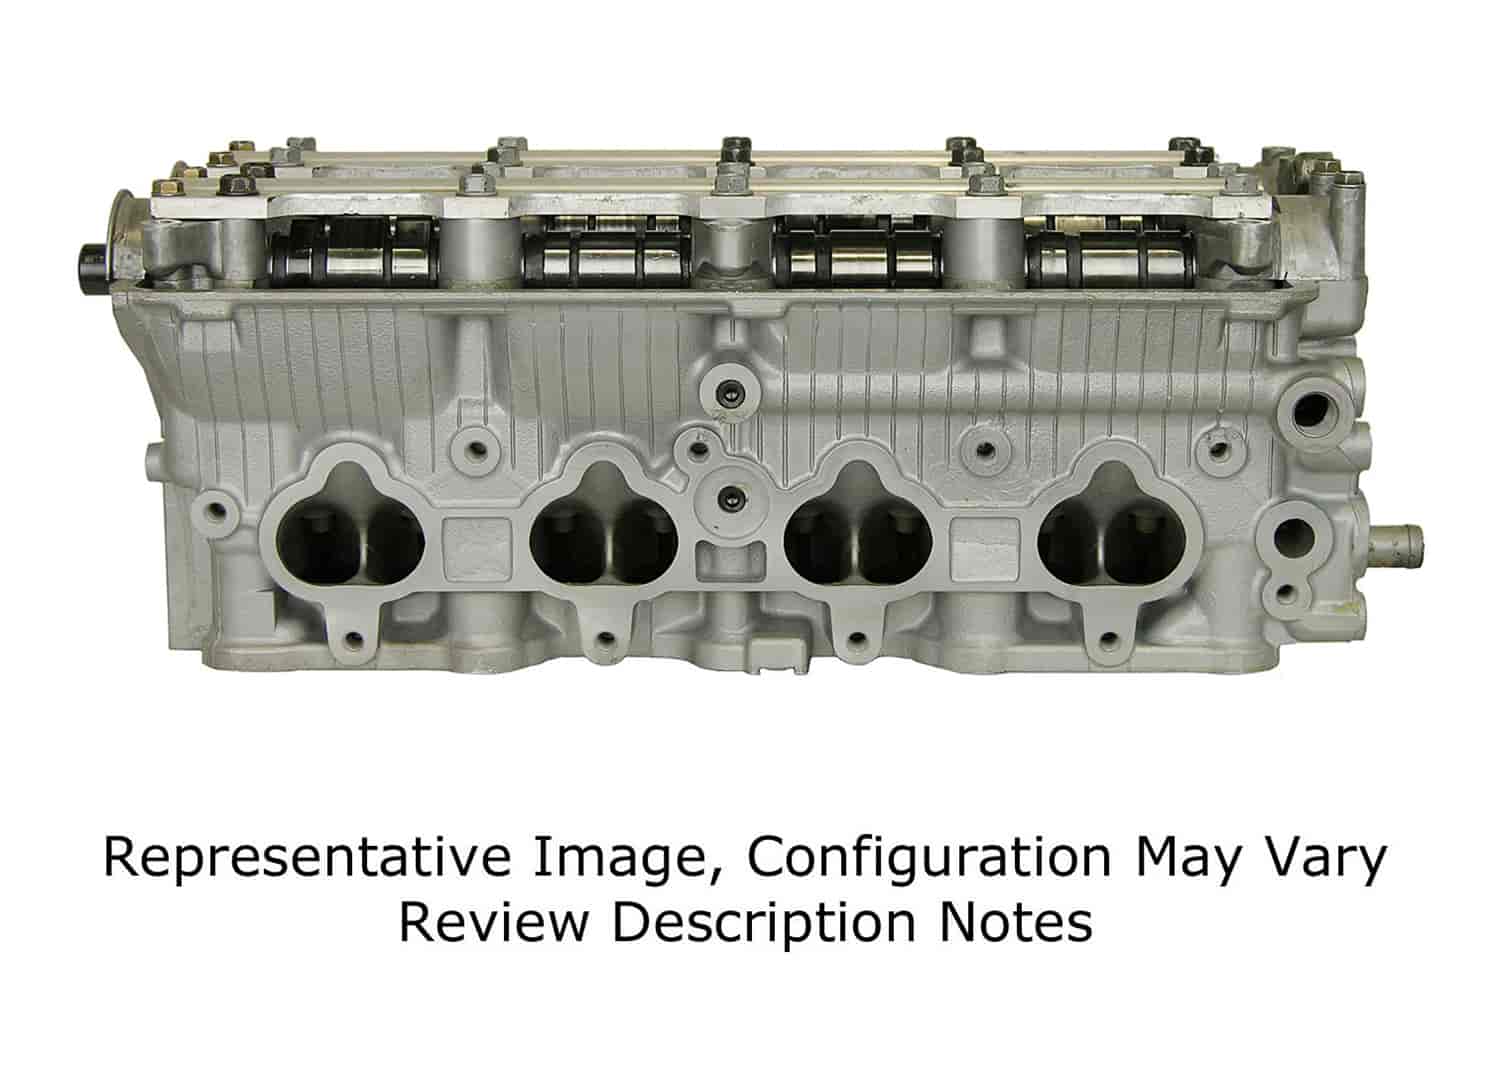 Remanufactured Cylinder Head for 1998-2001 Honda Prelude with